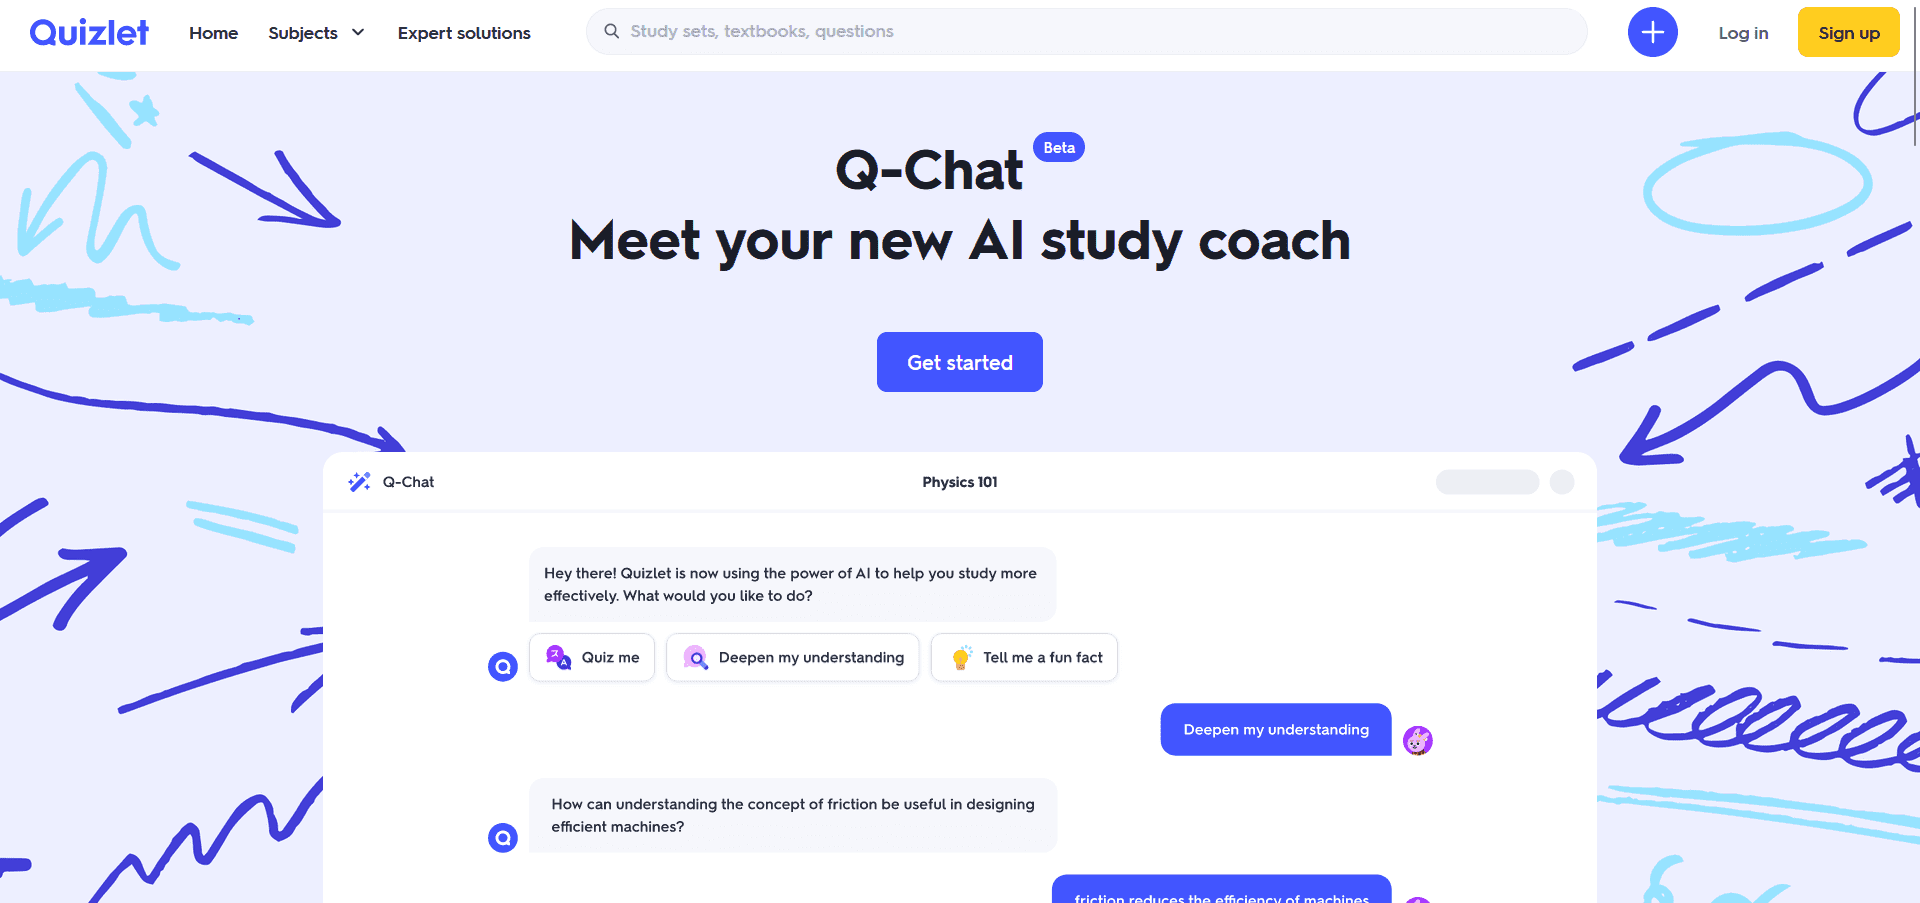 Quizlet AI Tools homepage image